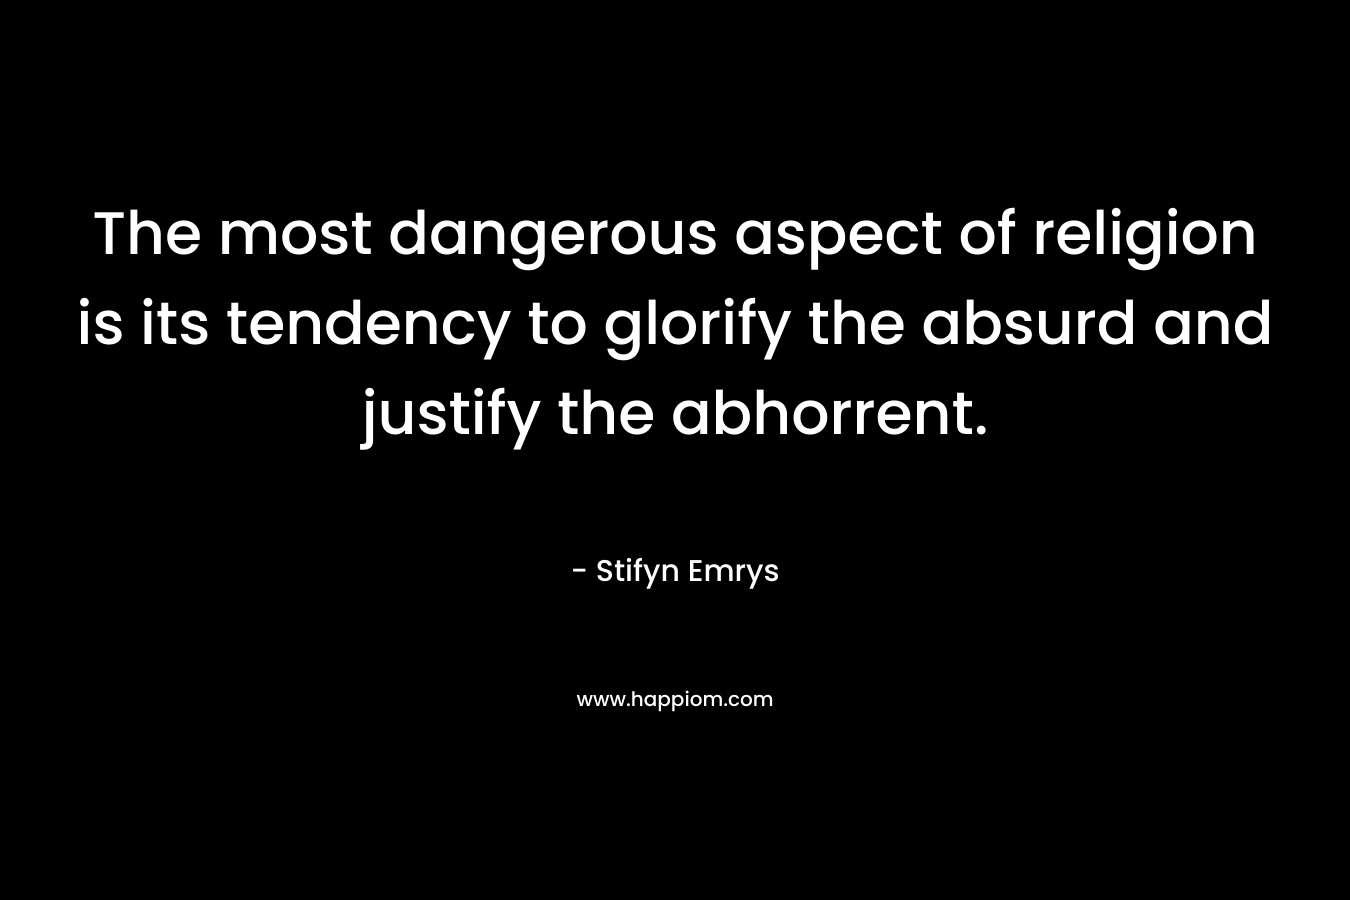 The most dangerous aspect of religion is its tendency to glorify the absurd and justify the abhorrent.